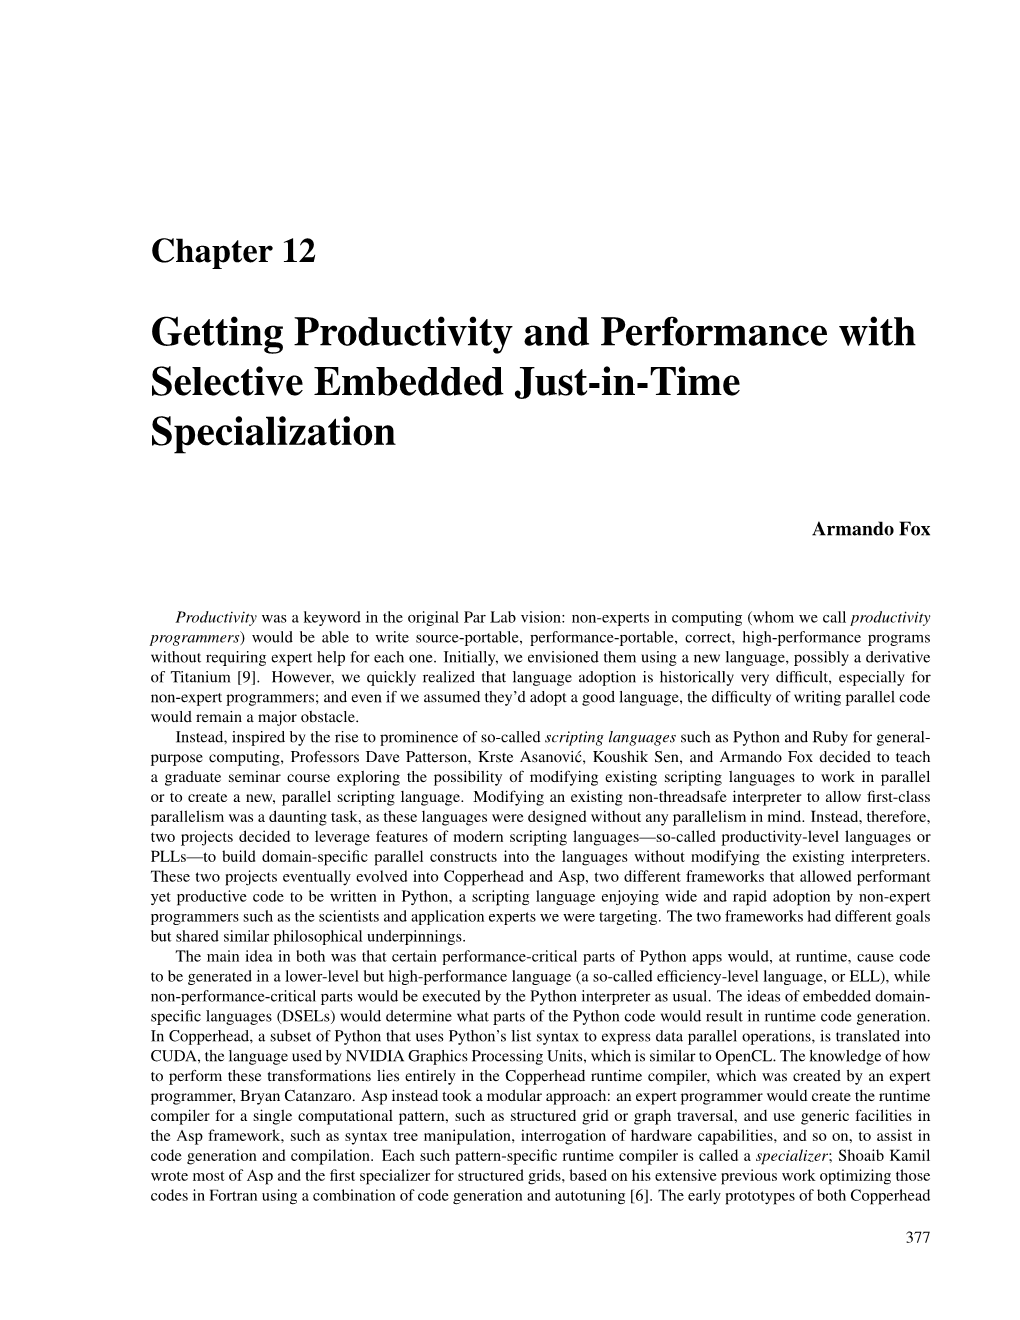 Getting Productivity and Performance with Selective Embedded Just-In-Time Specialization